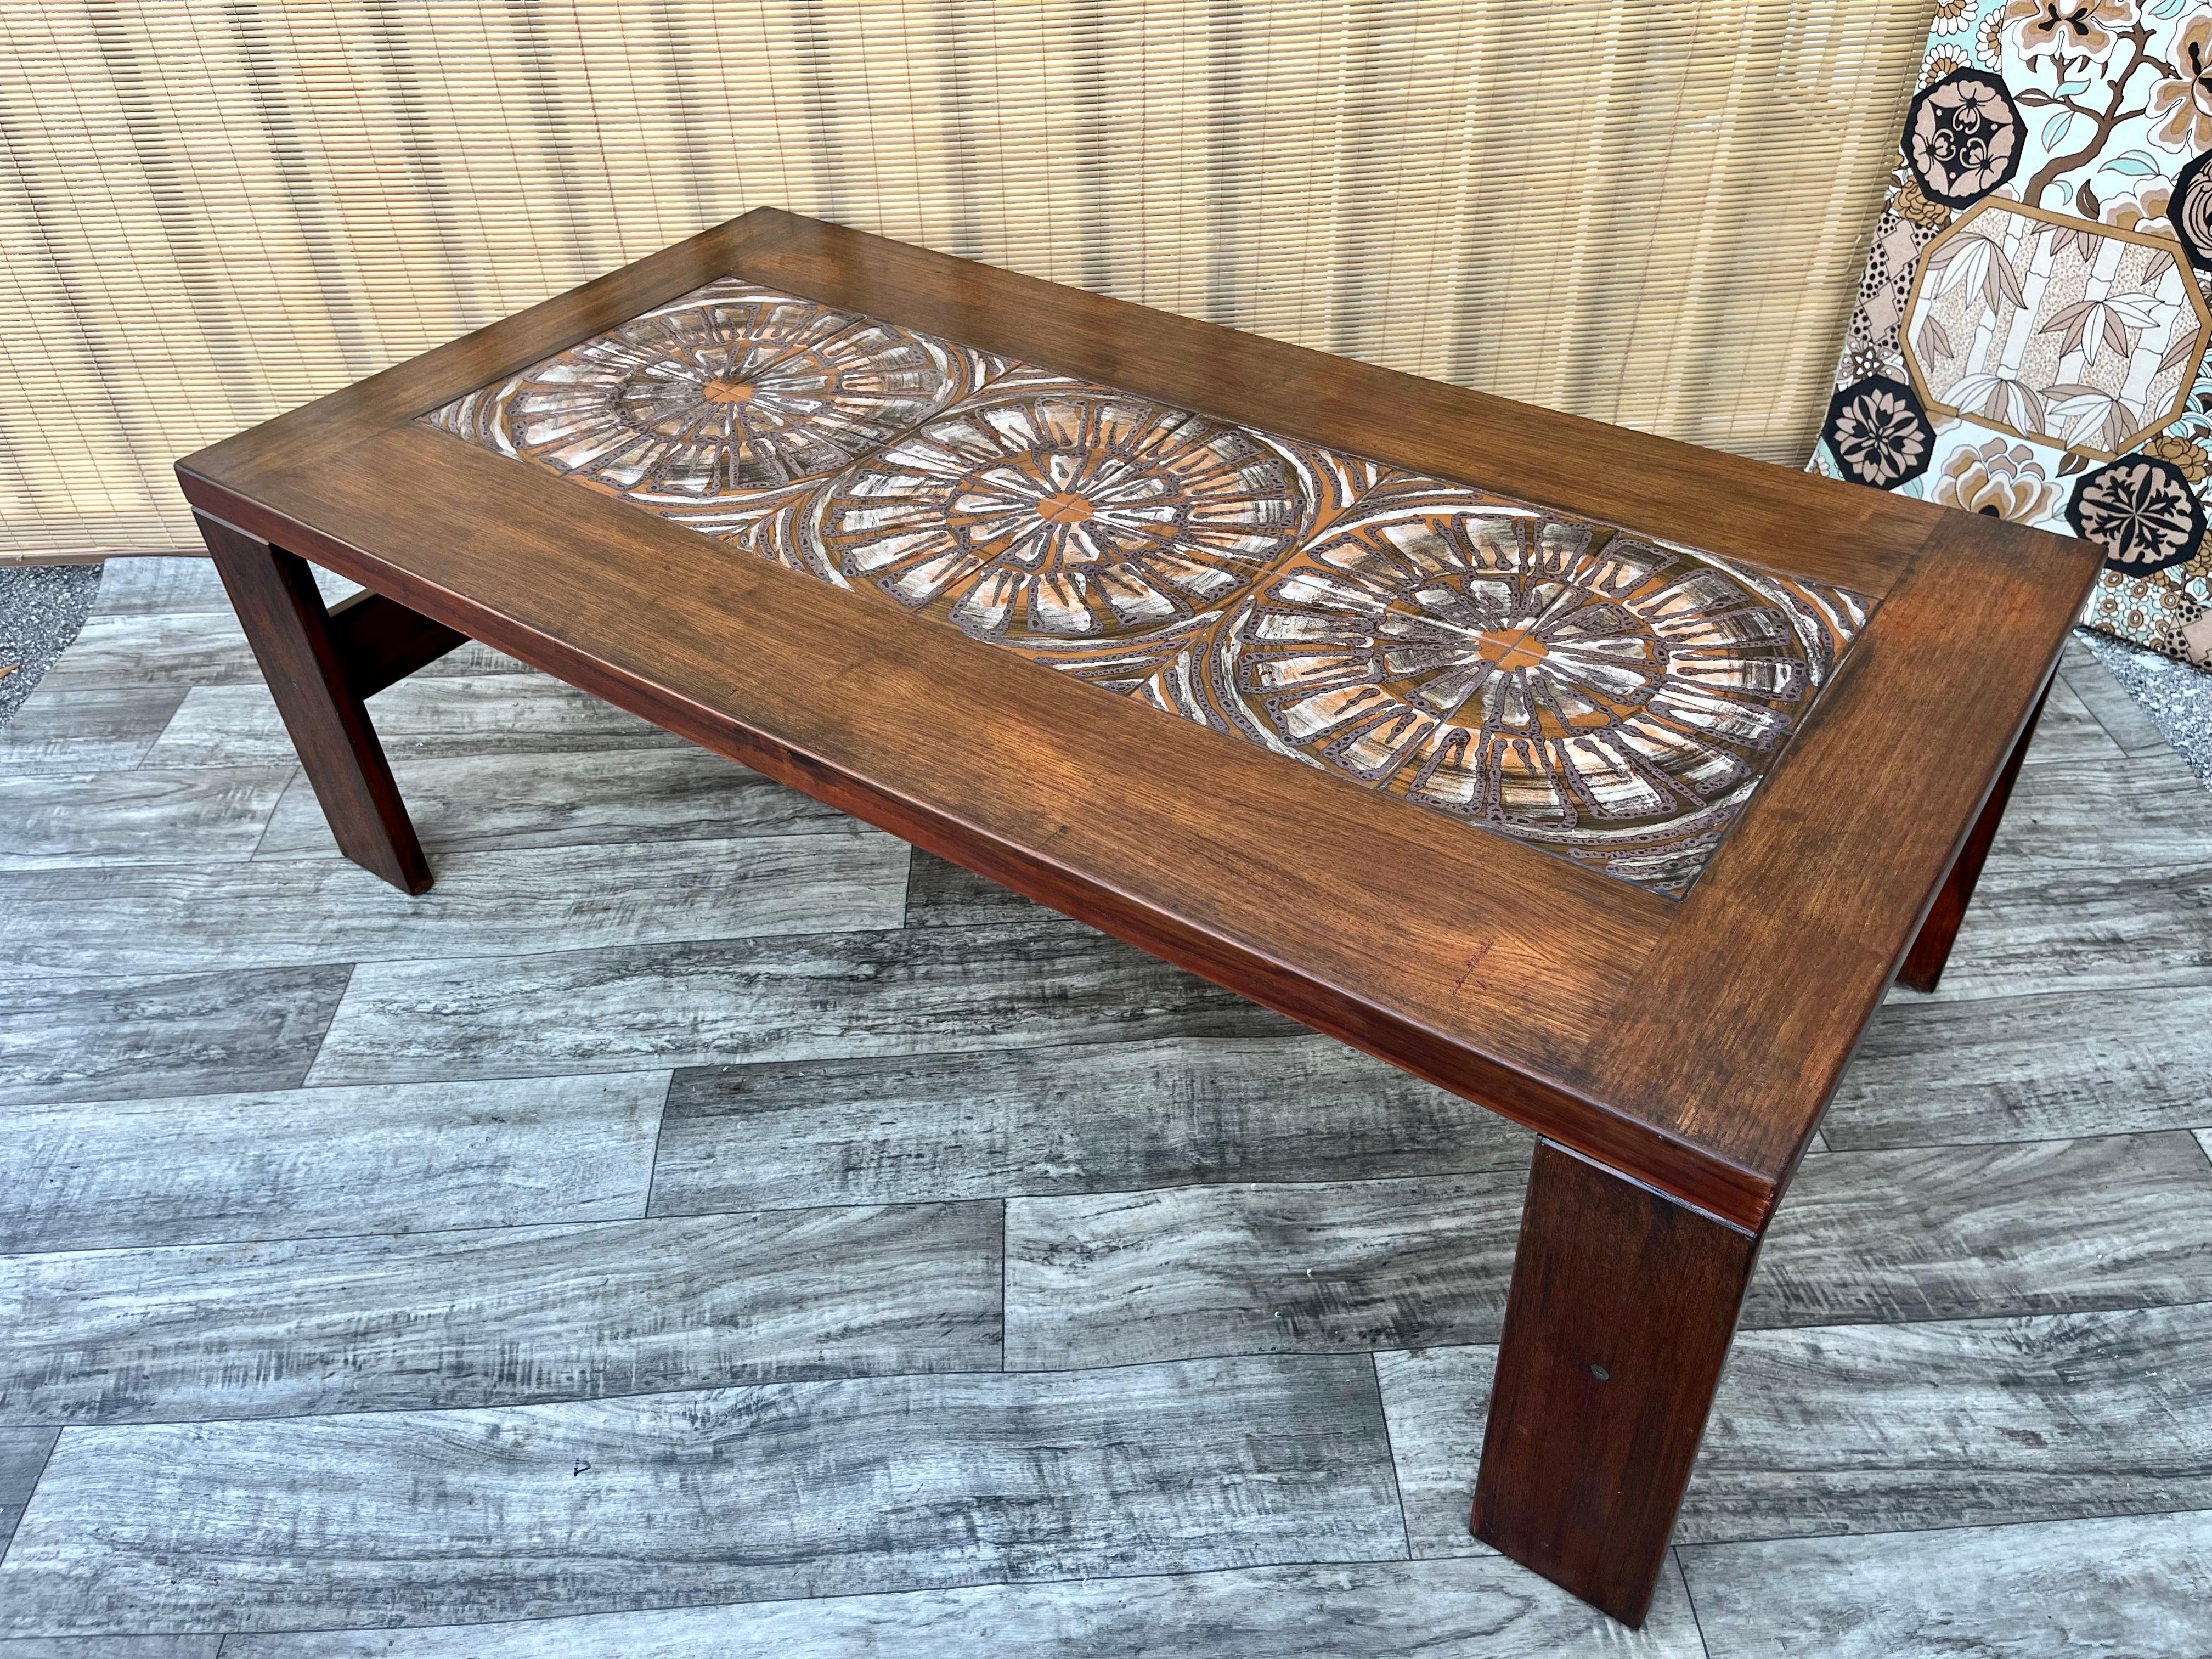 Danish Mid Century Modern Coffee Table With Ceramic Tile Inlays. Circa 1960s  For Sale 1